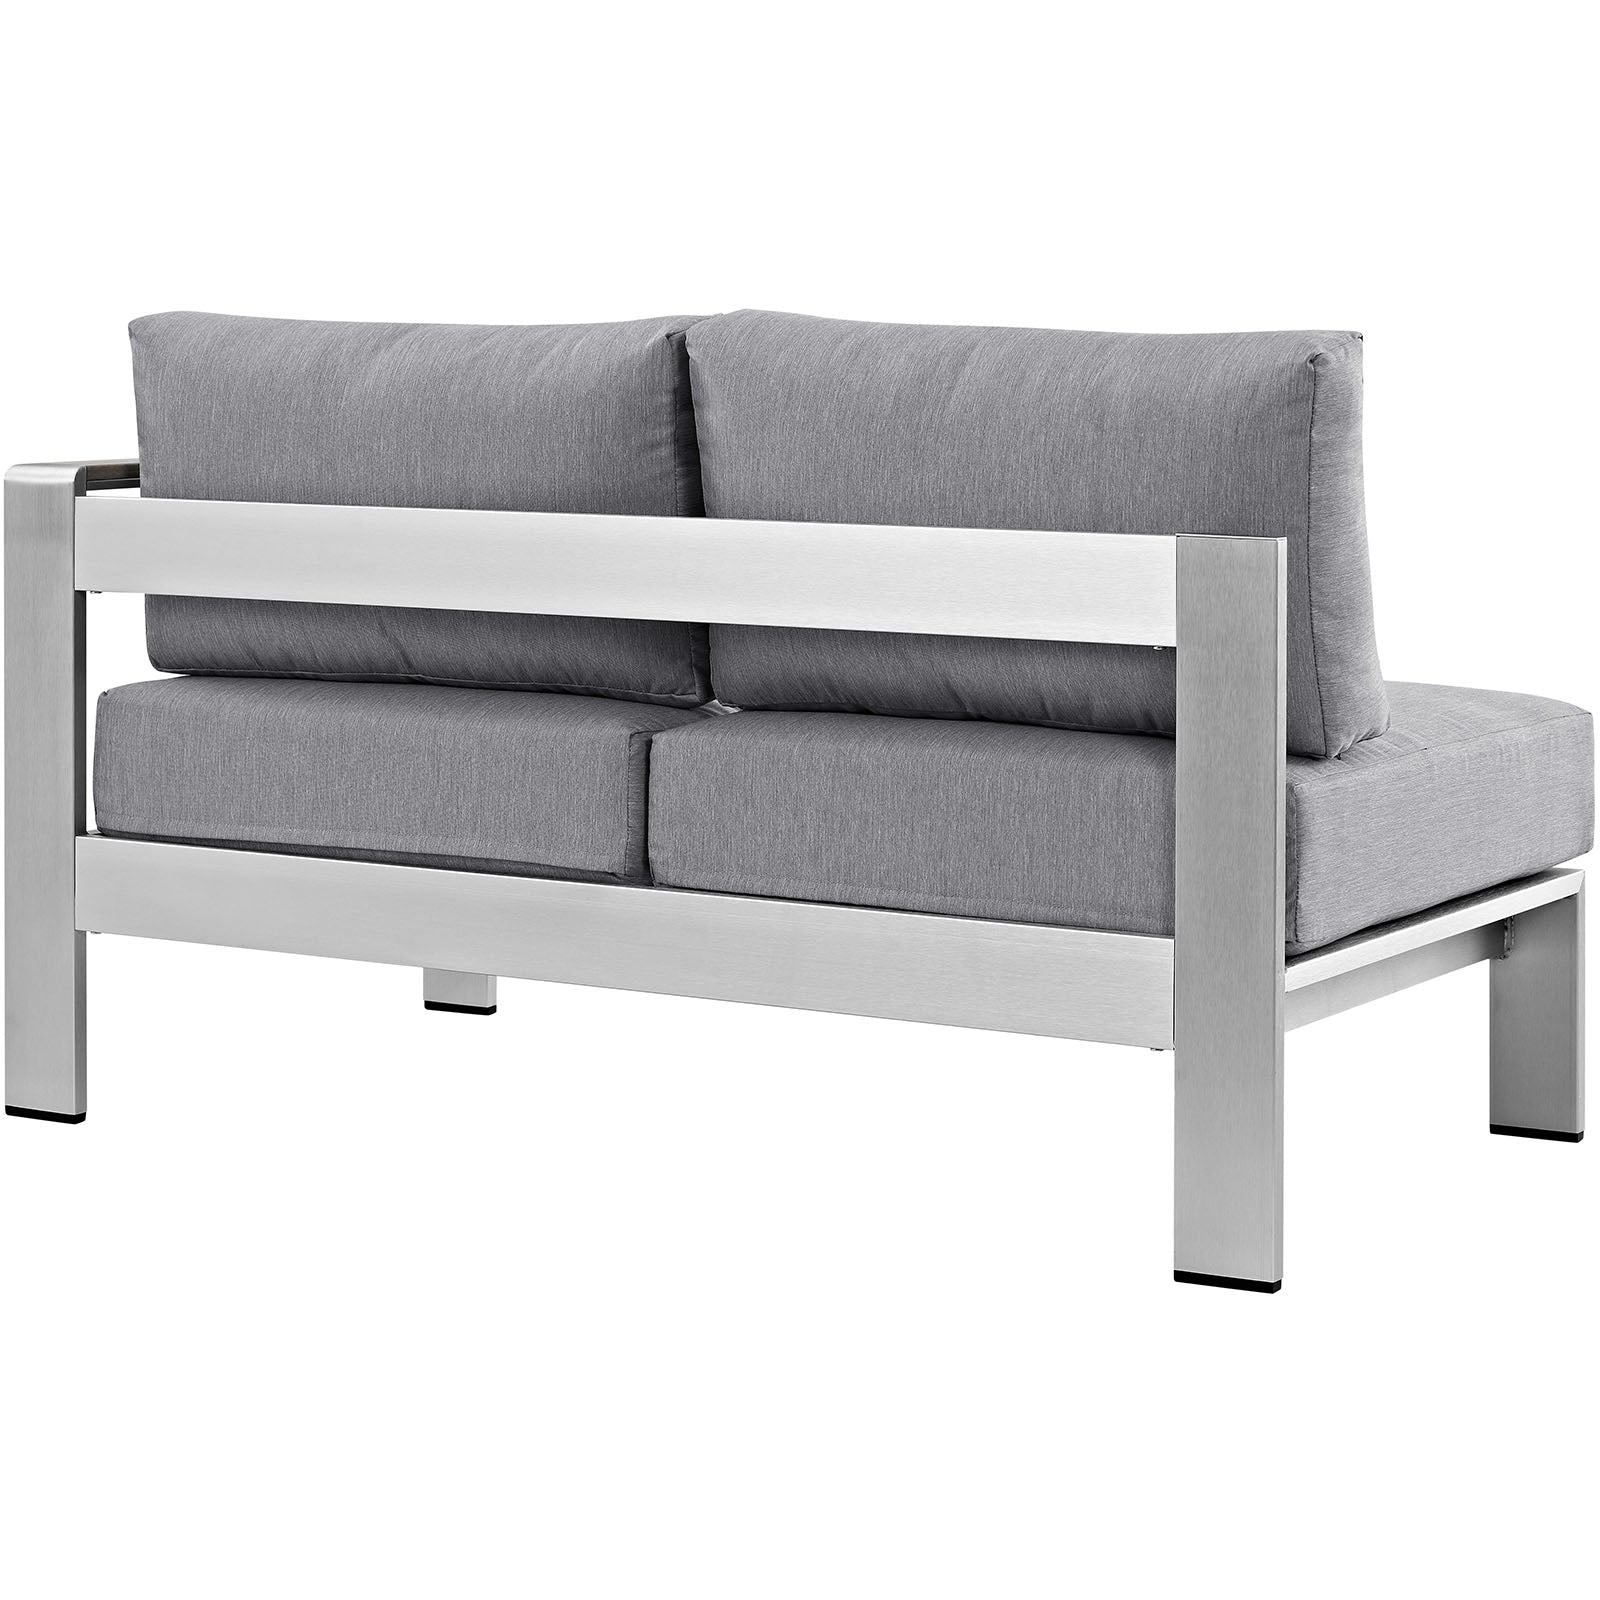 Modway Outdoor Sofas - Shore Right-Arm Corner Sectional Outdoor Loveseat Gray & Silver